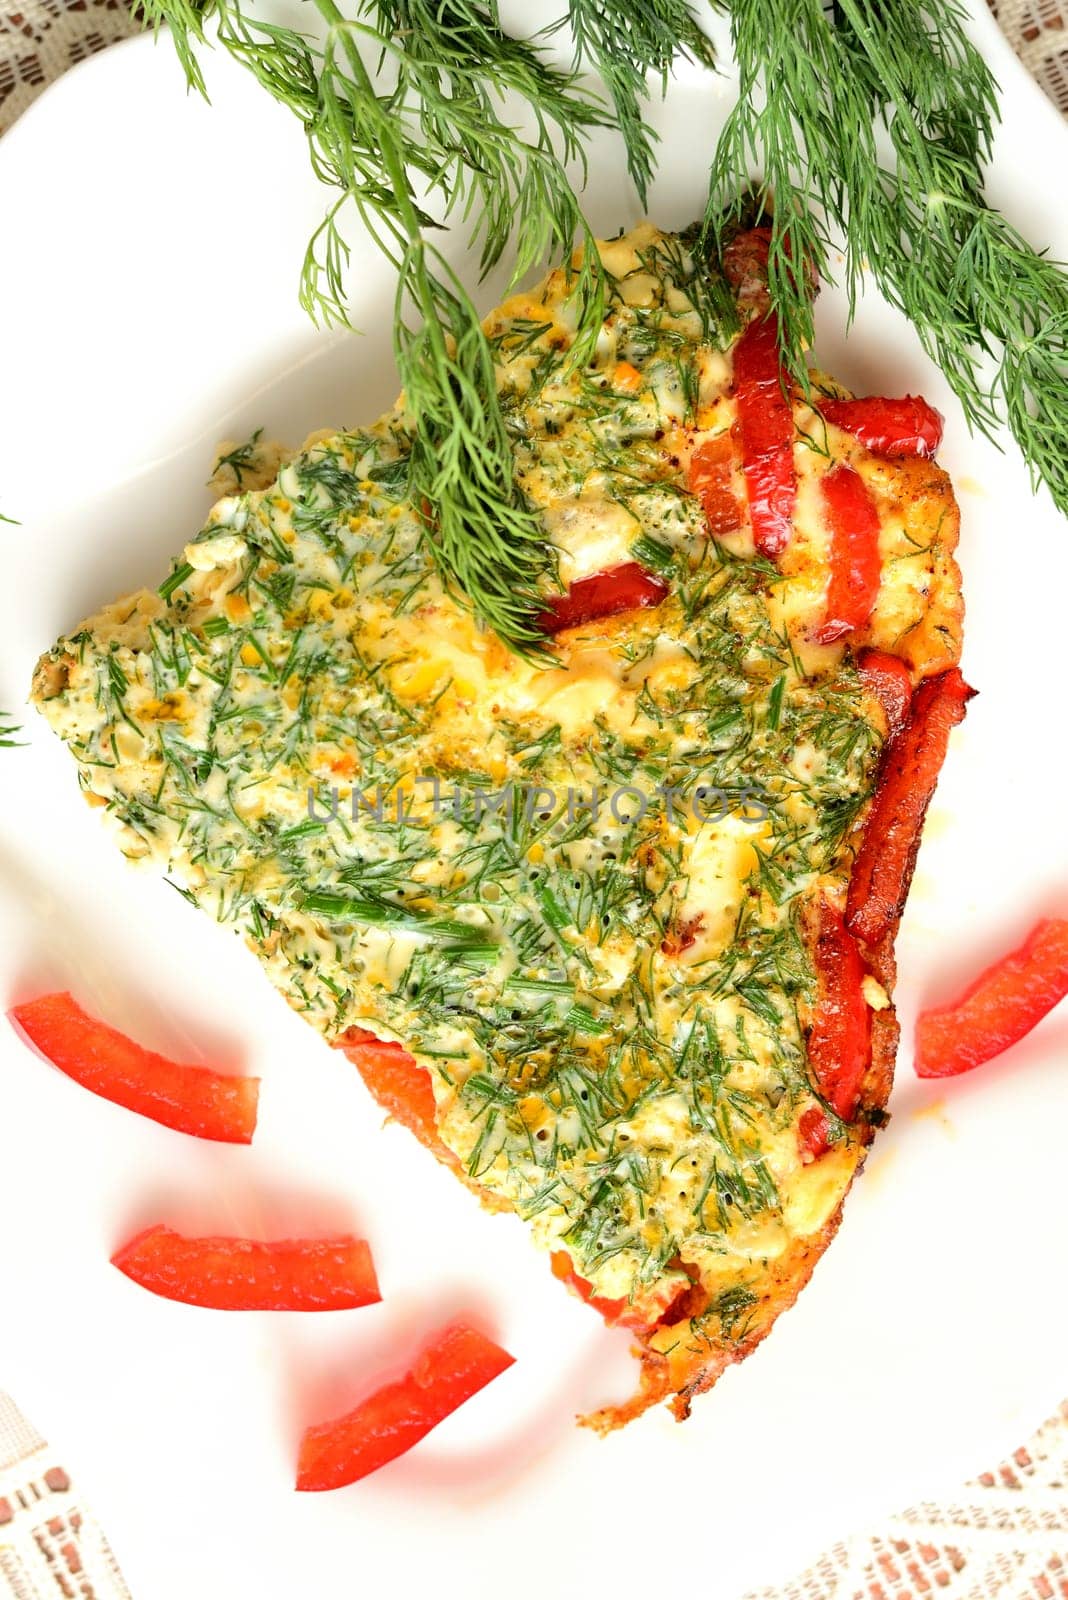 Omelette with sweet pepper and dill